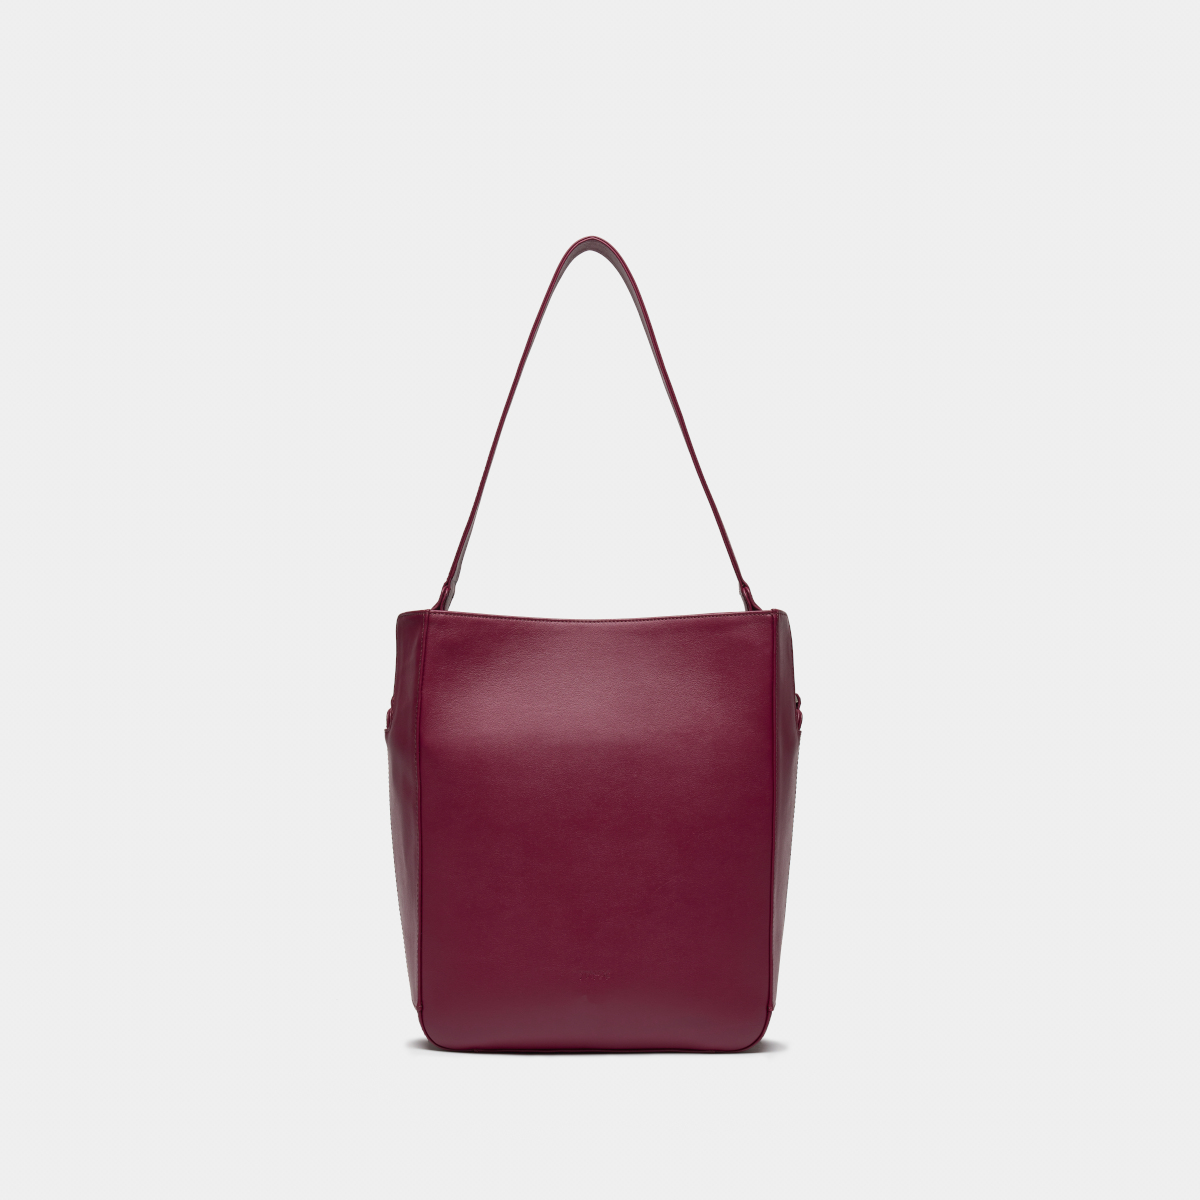 D03s leather bag